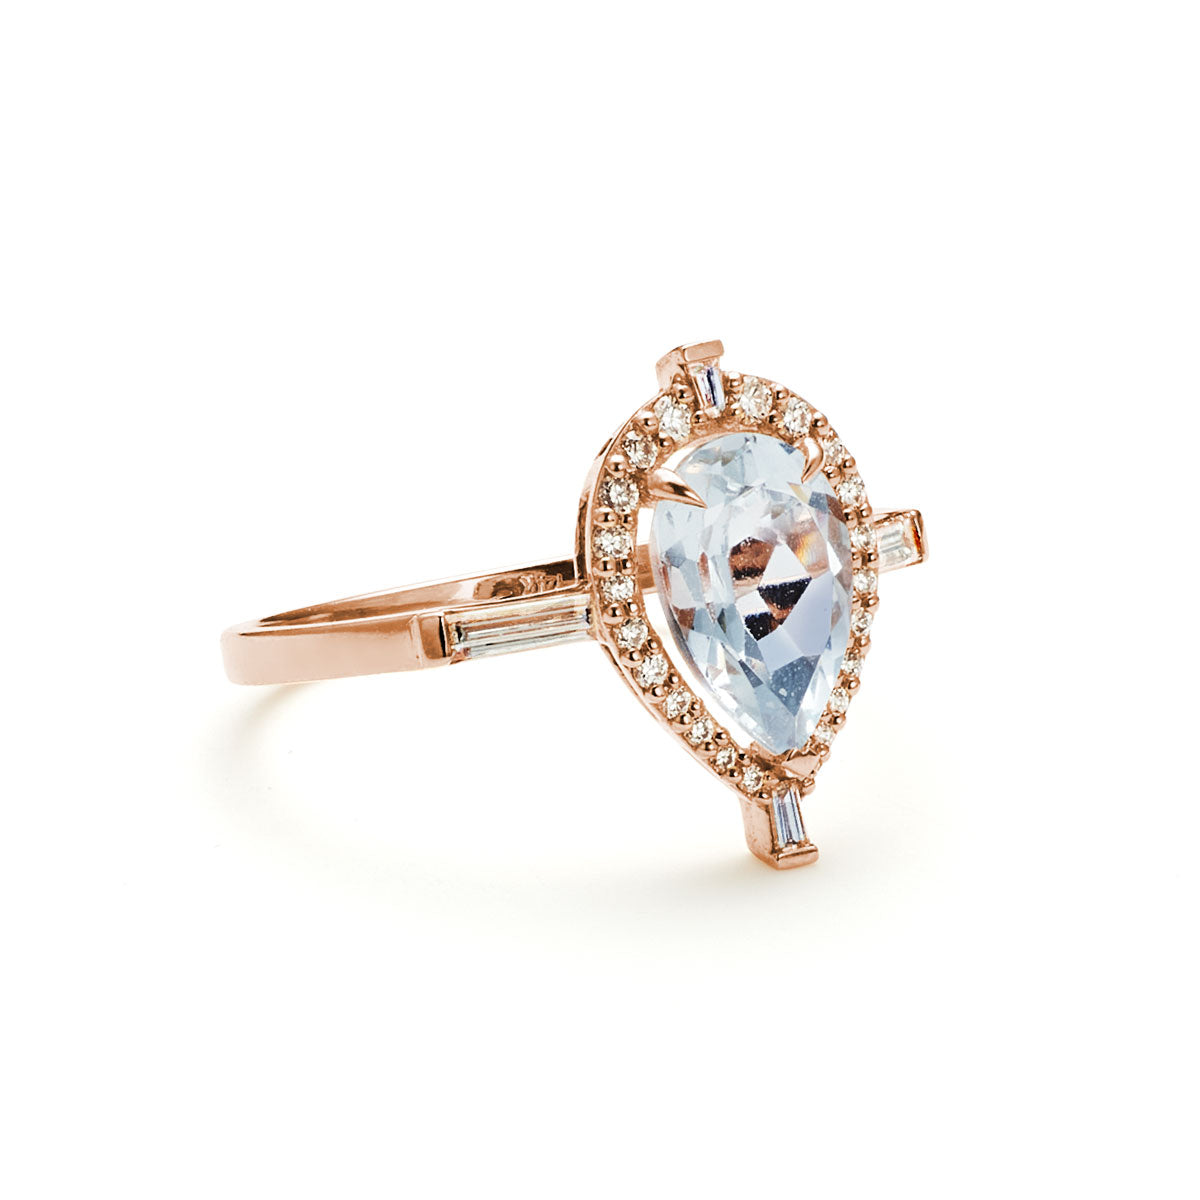 Angled view of the Pear shaped aquamarine diamond Marchesa ring on white background.